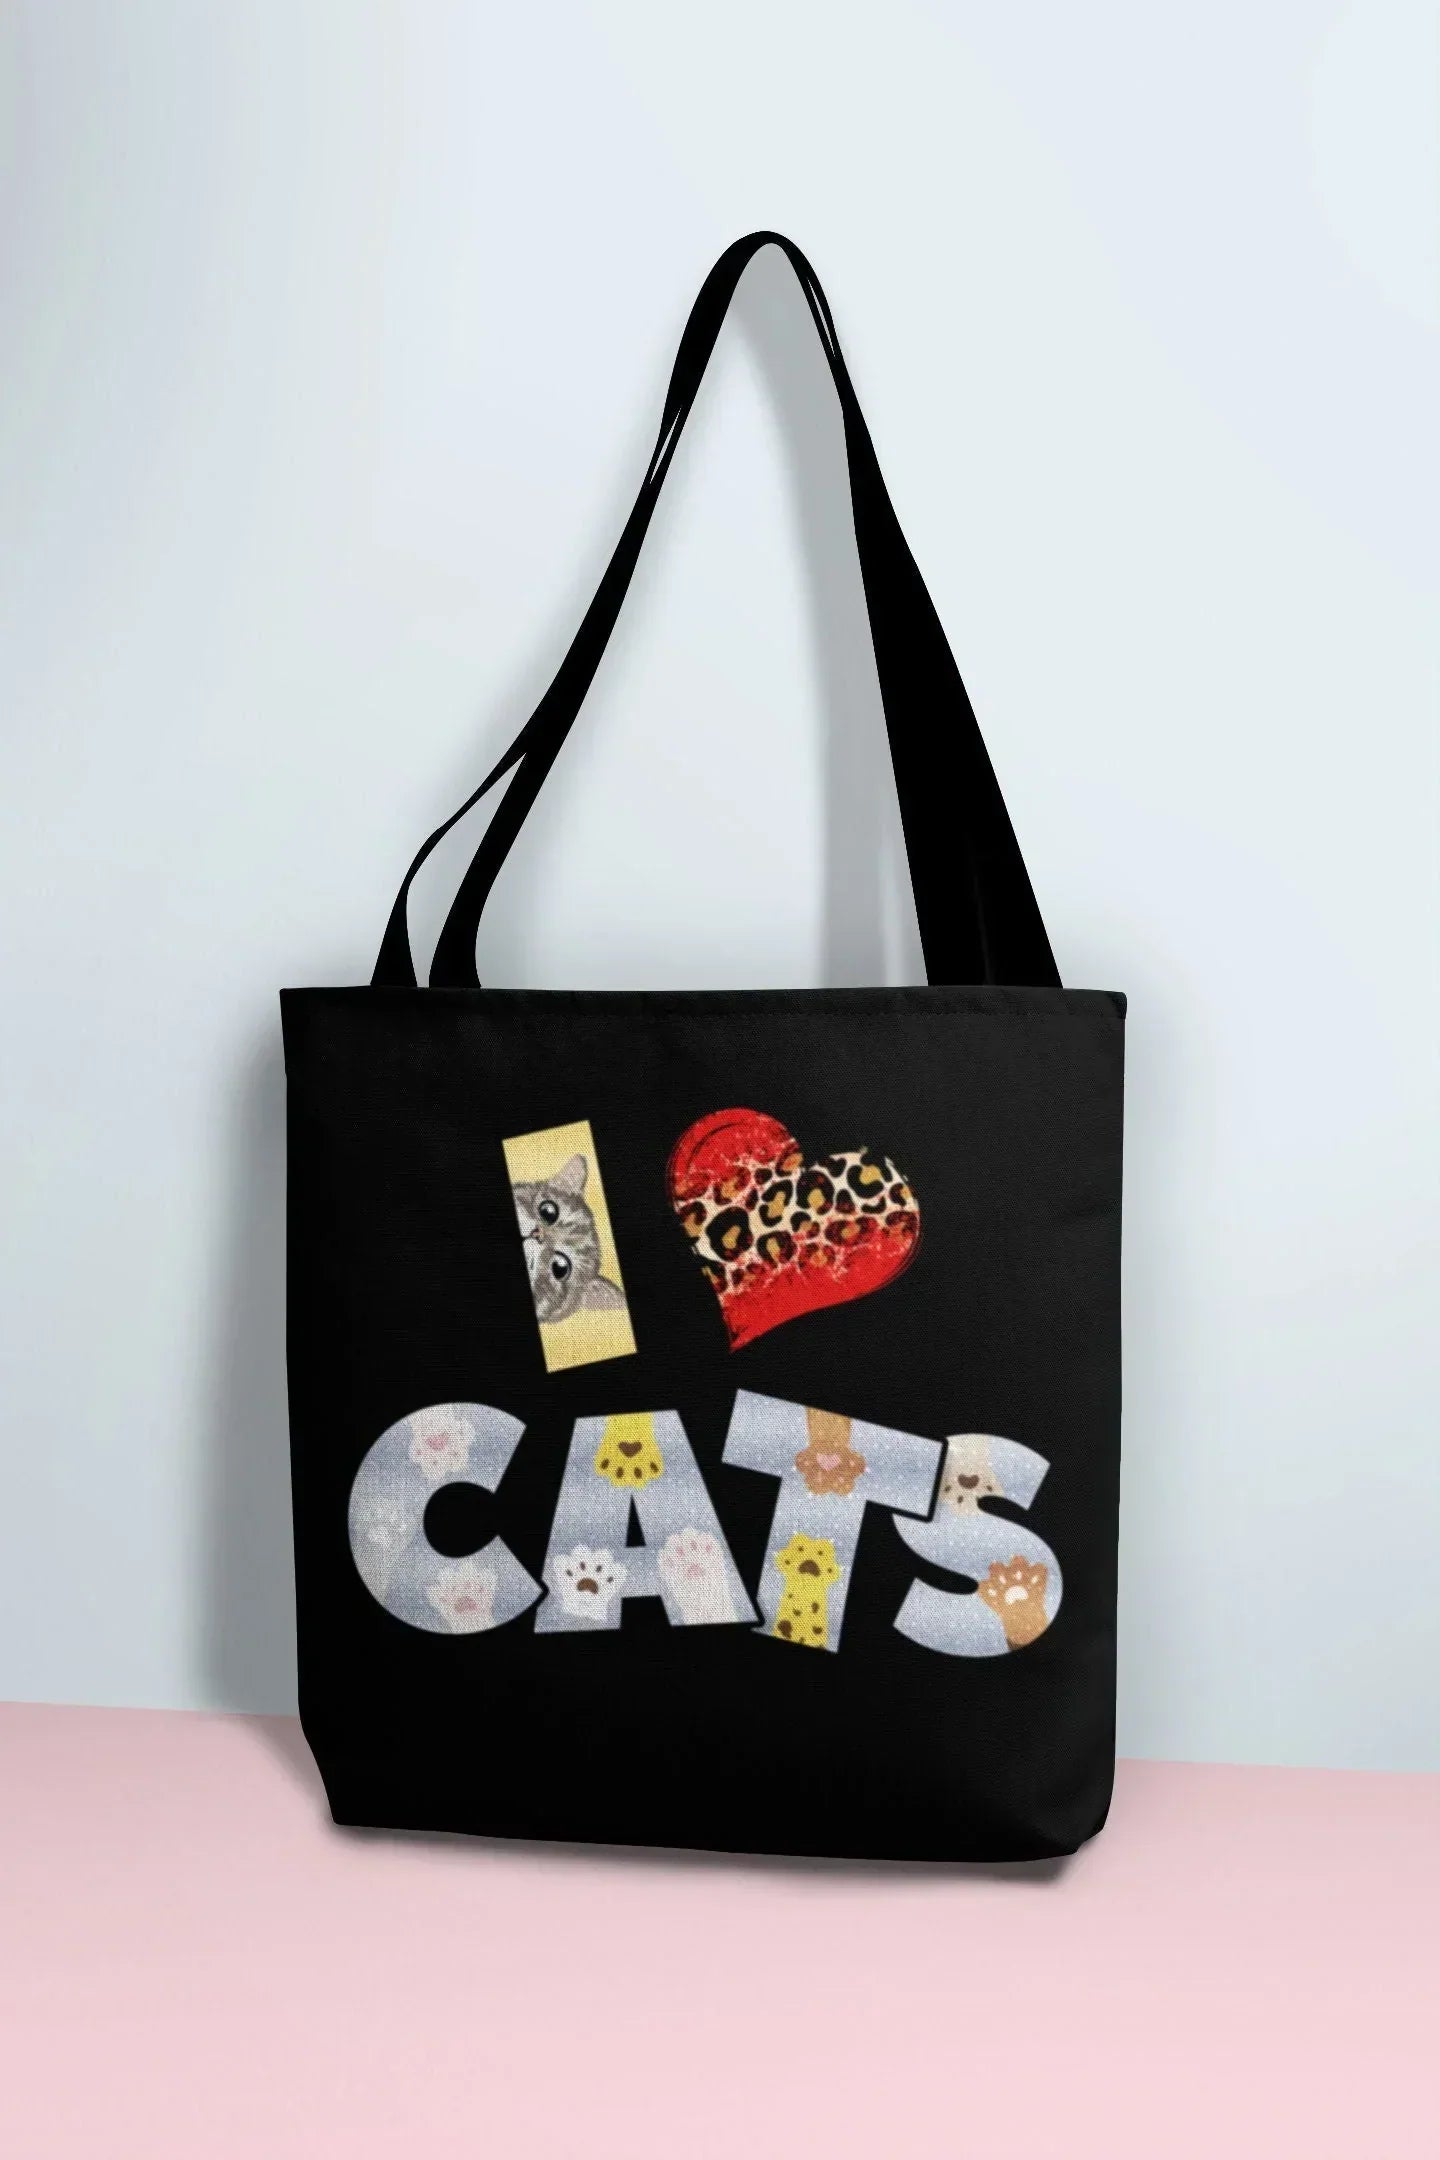 Cat Aesthetic Tote Bag with Pockets, Colorful Cat Lovers Gift, Cat Mom Canvas Bag, Nurse Tote, Funny Cat Themed Gifts for Teachers, Cat Dad HMDesignStudioUS